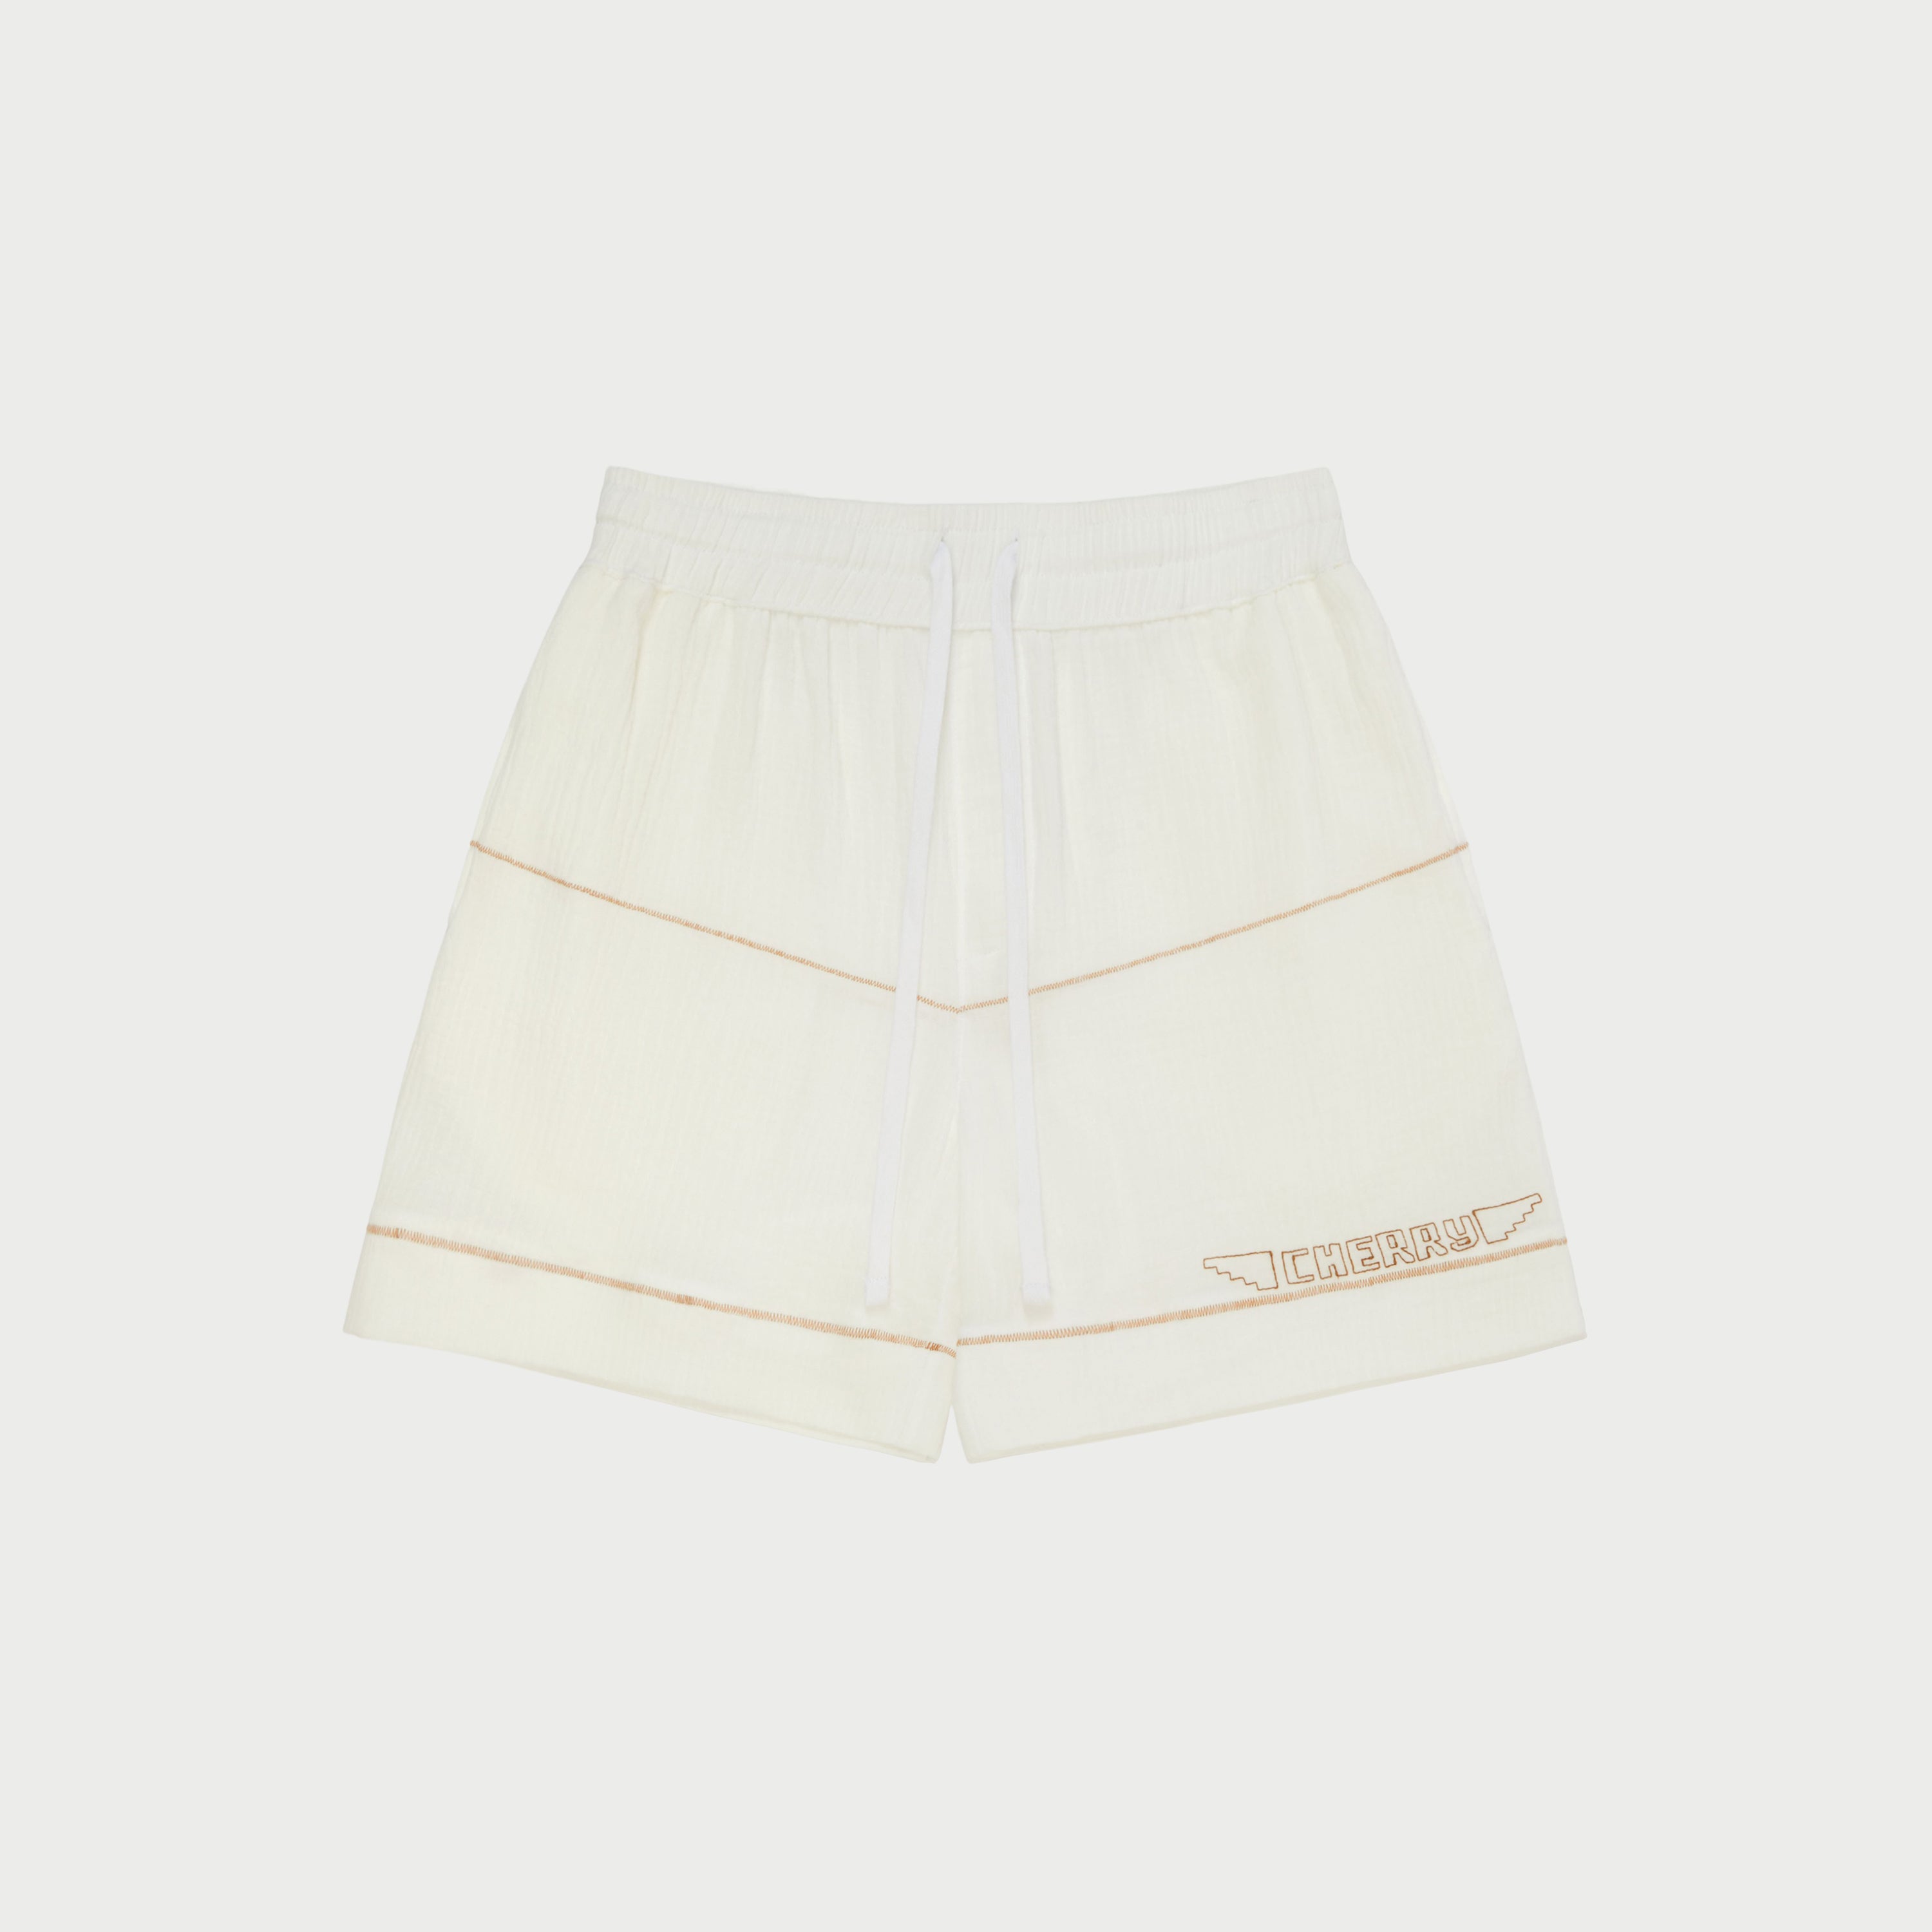 Embroidered Vacation Shorts (White)